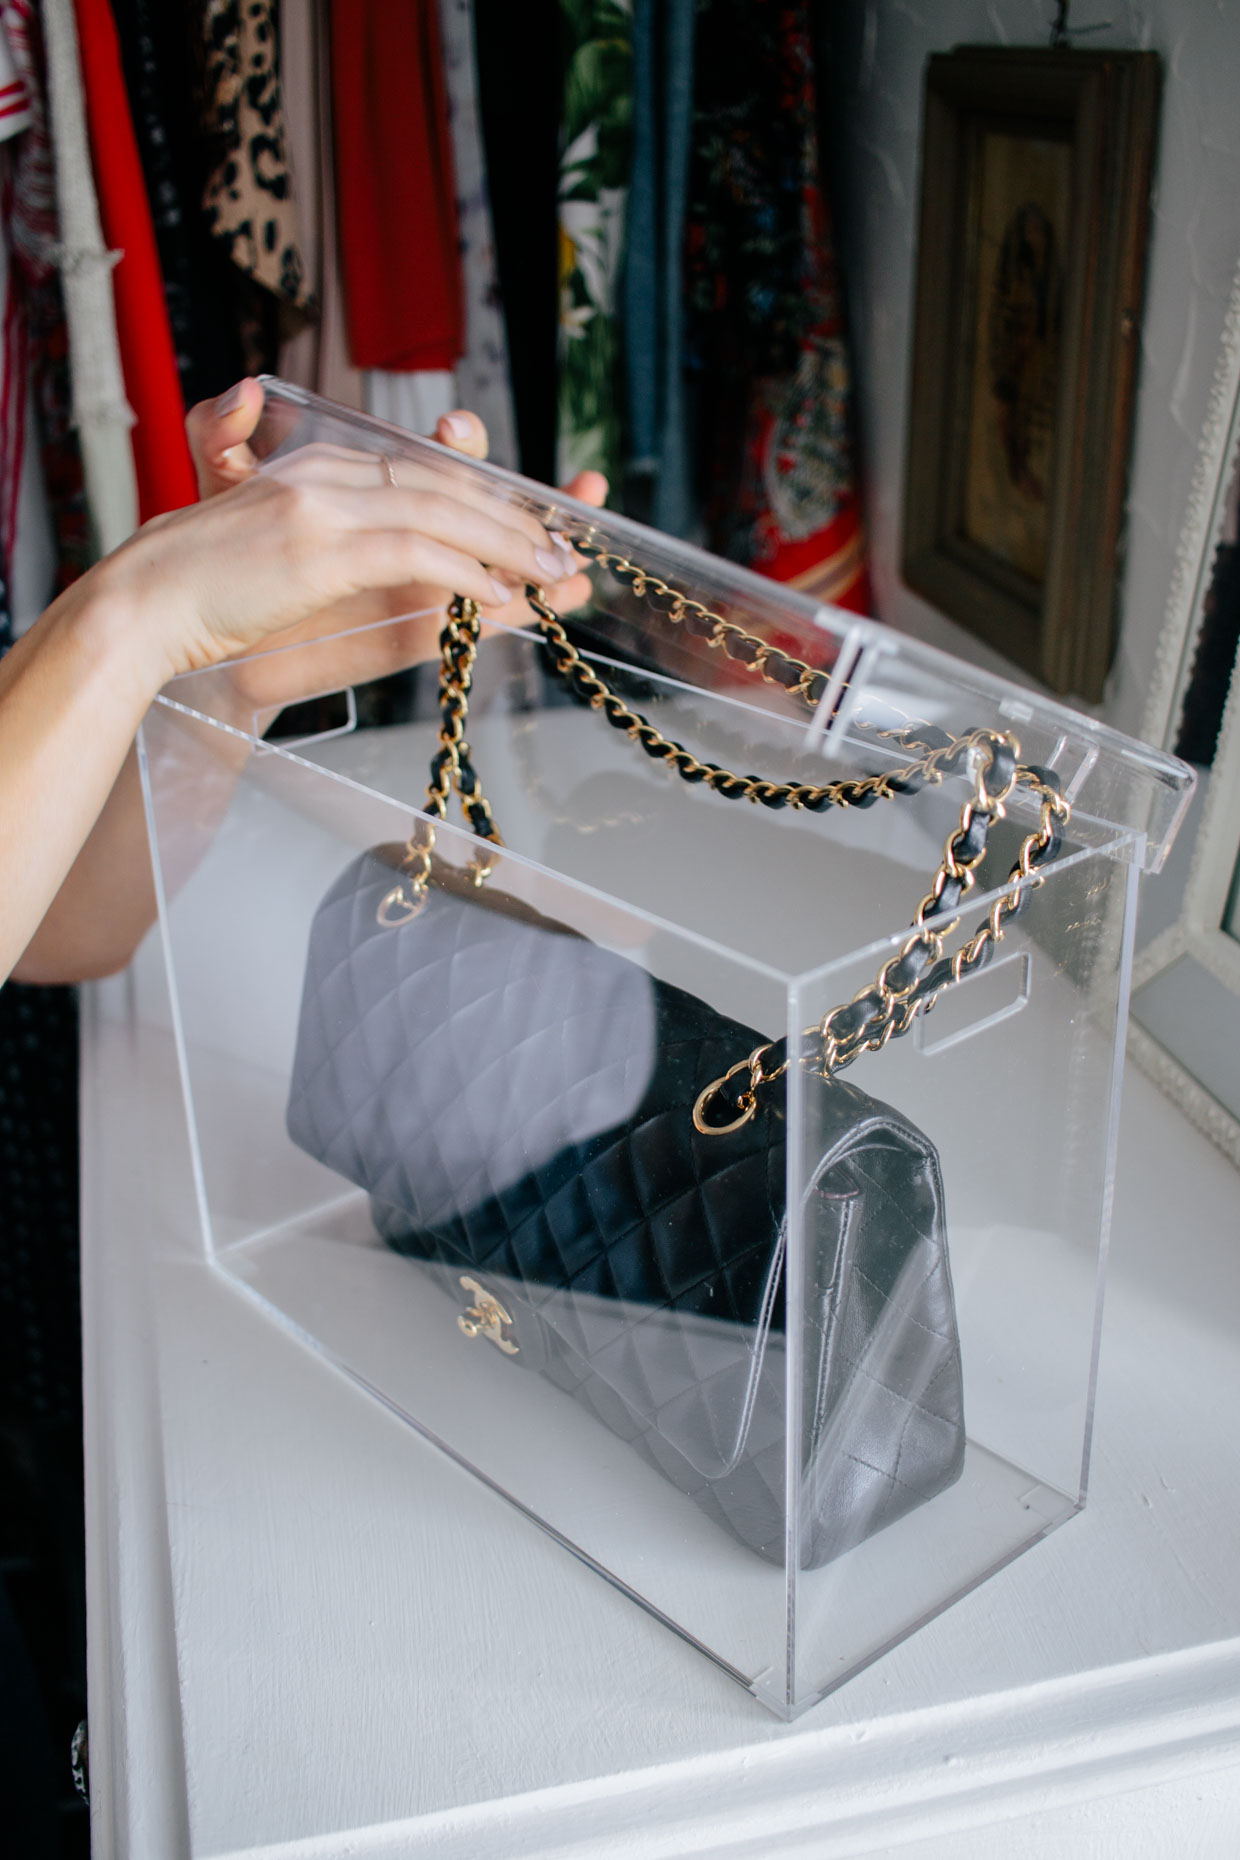 Meagan Brandon fashion blogger of Meagan's Moda shows how to properly store and display Chanel handbags with Luxury Bag Display acrylic case